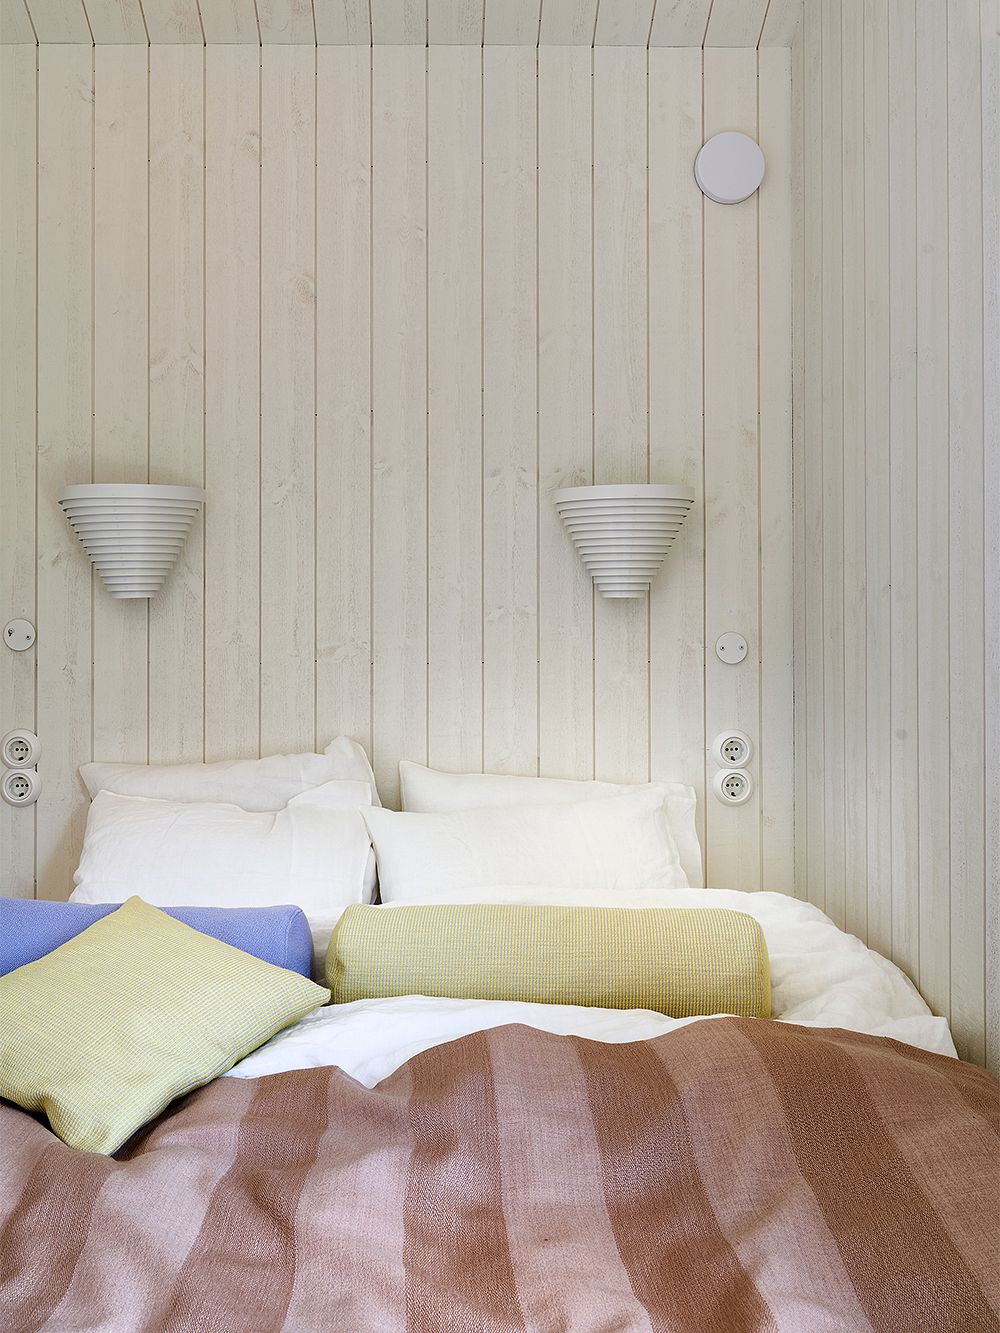 An image of Sommarnöjen's Sommar 30 miniature house, which is a part of the Architect's House exhibition: Artek's A910 wall lamps as part of the bedroom decor.